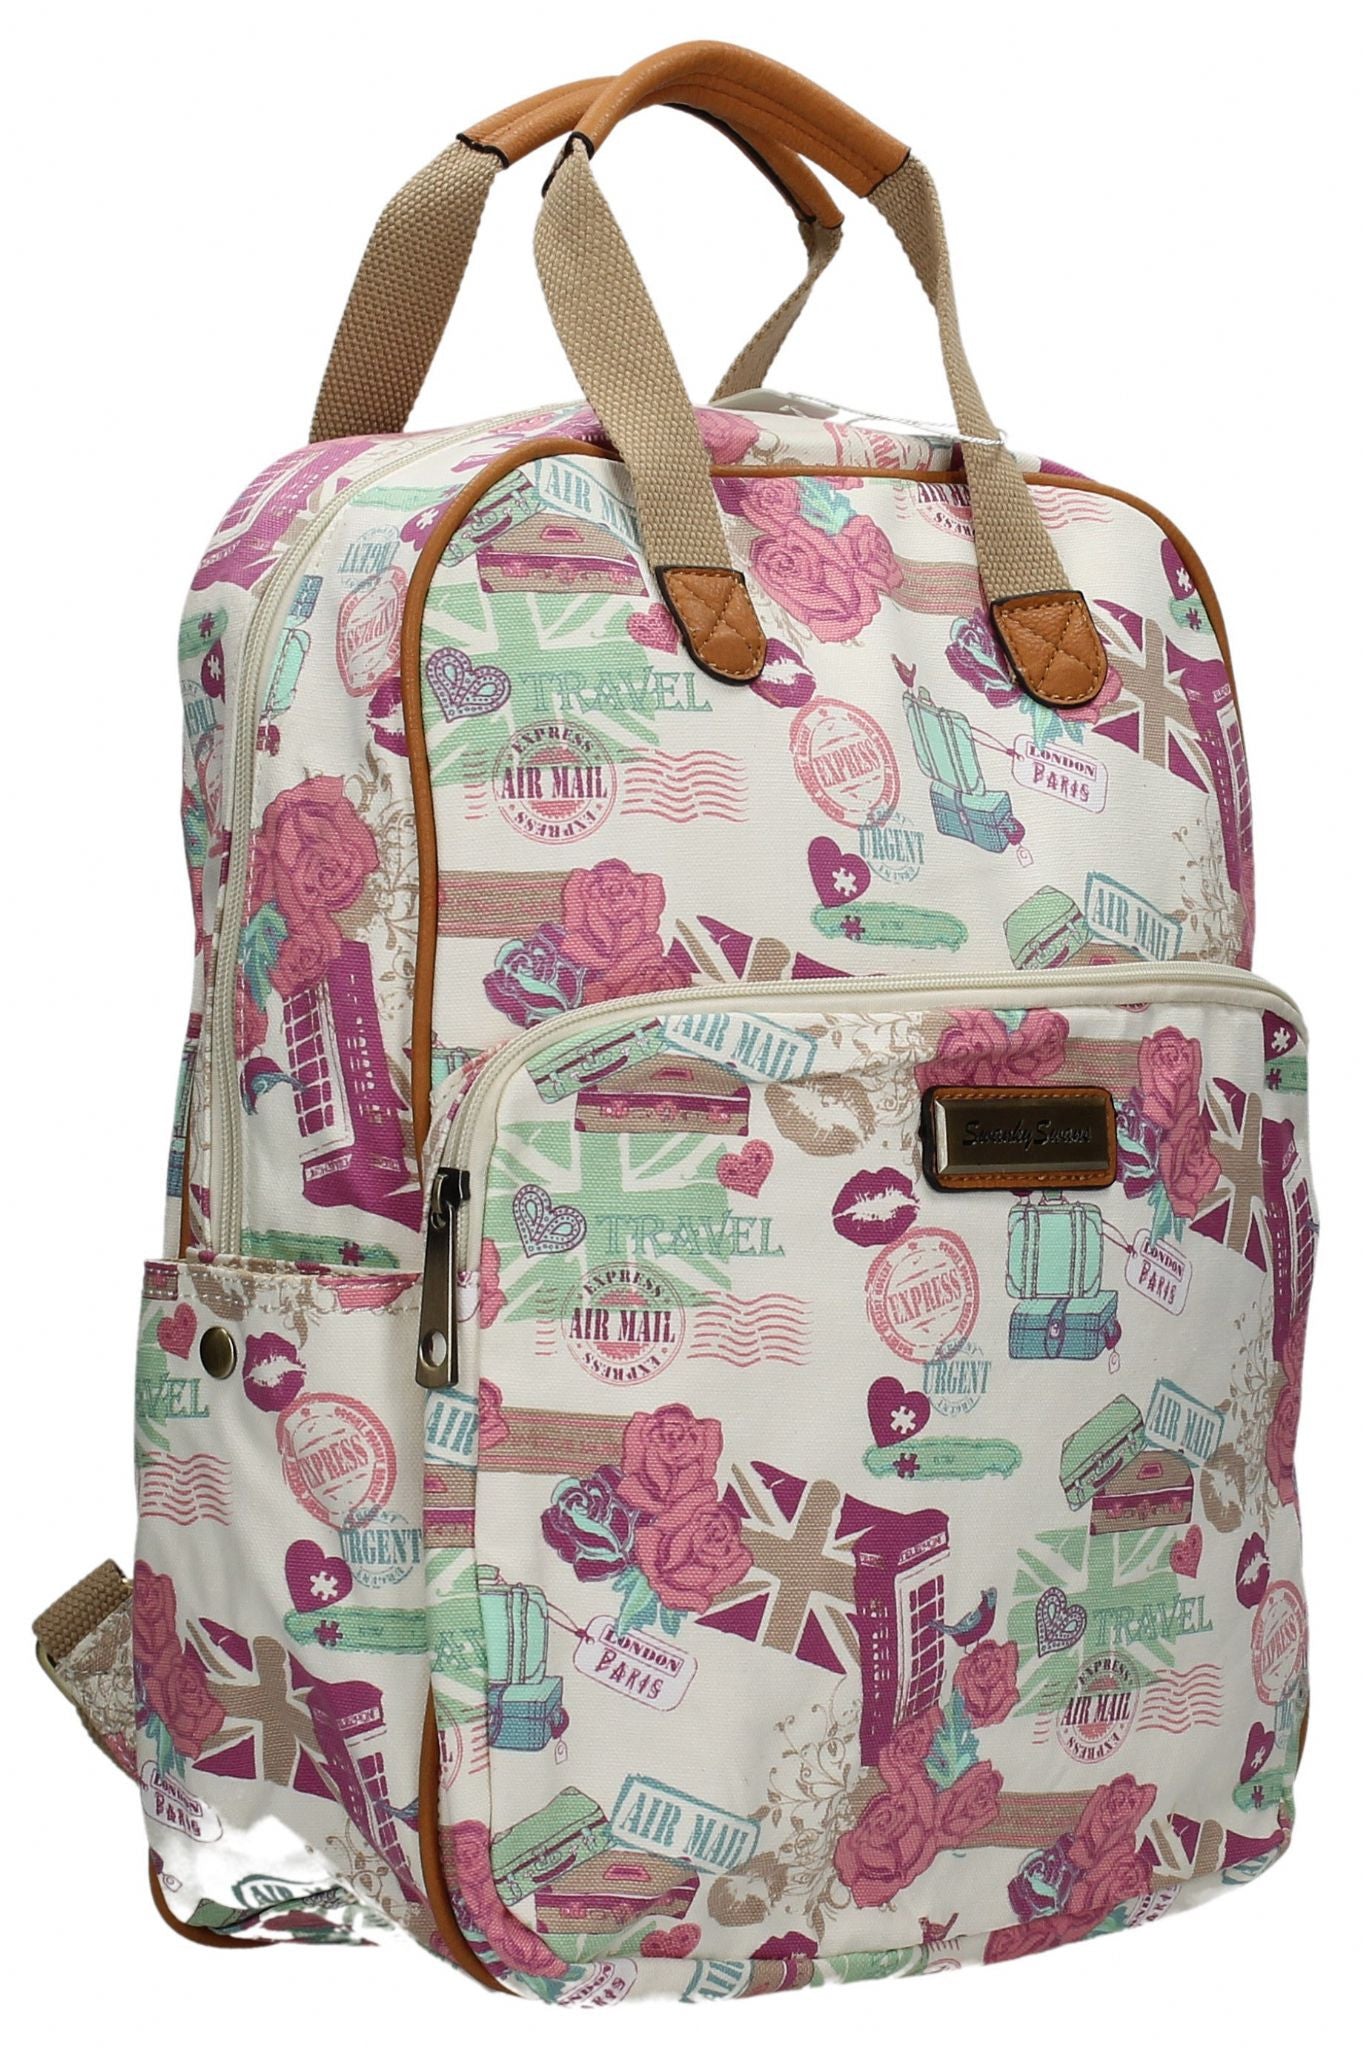 Swanky Swans Kensington London Travel Backpack with Matching Ipad / Tablet Case - BeigeBeautiful cheap school backpack bag